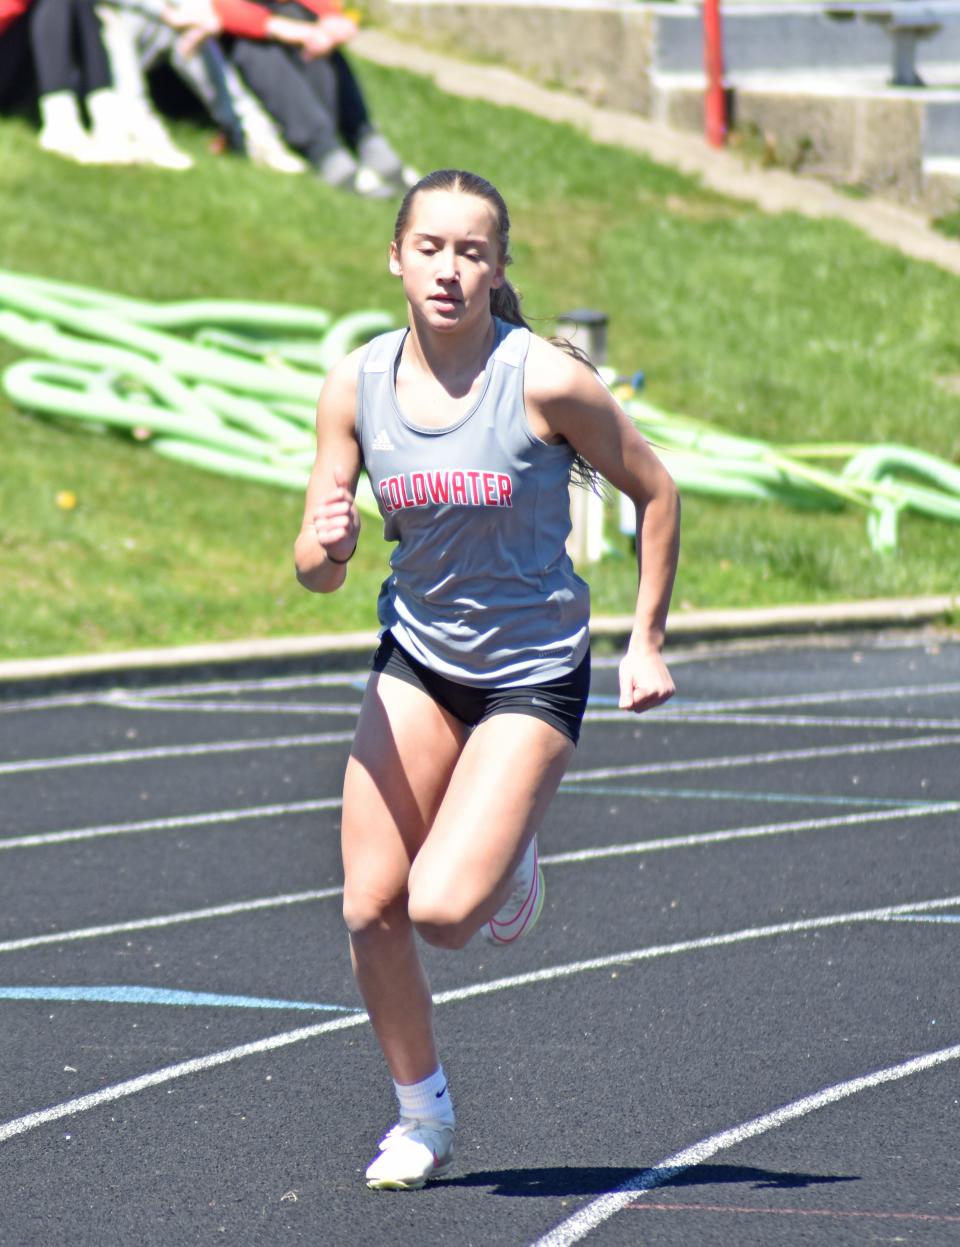 Coldwater's Ella Grabowski, shown here running the 400 meter dash, broke the CHS school record in the long jump at Friday's Portage Northern Invite